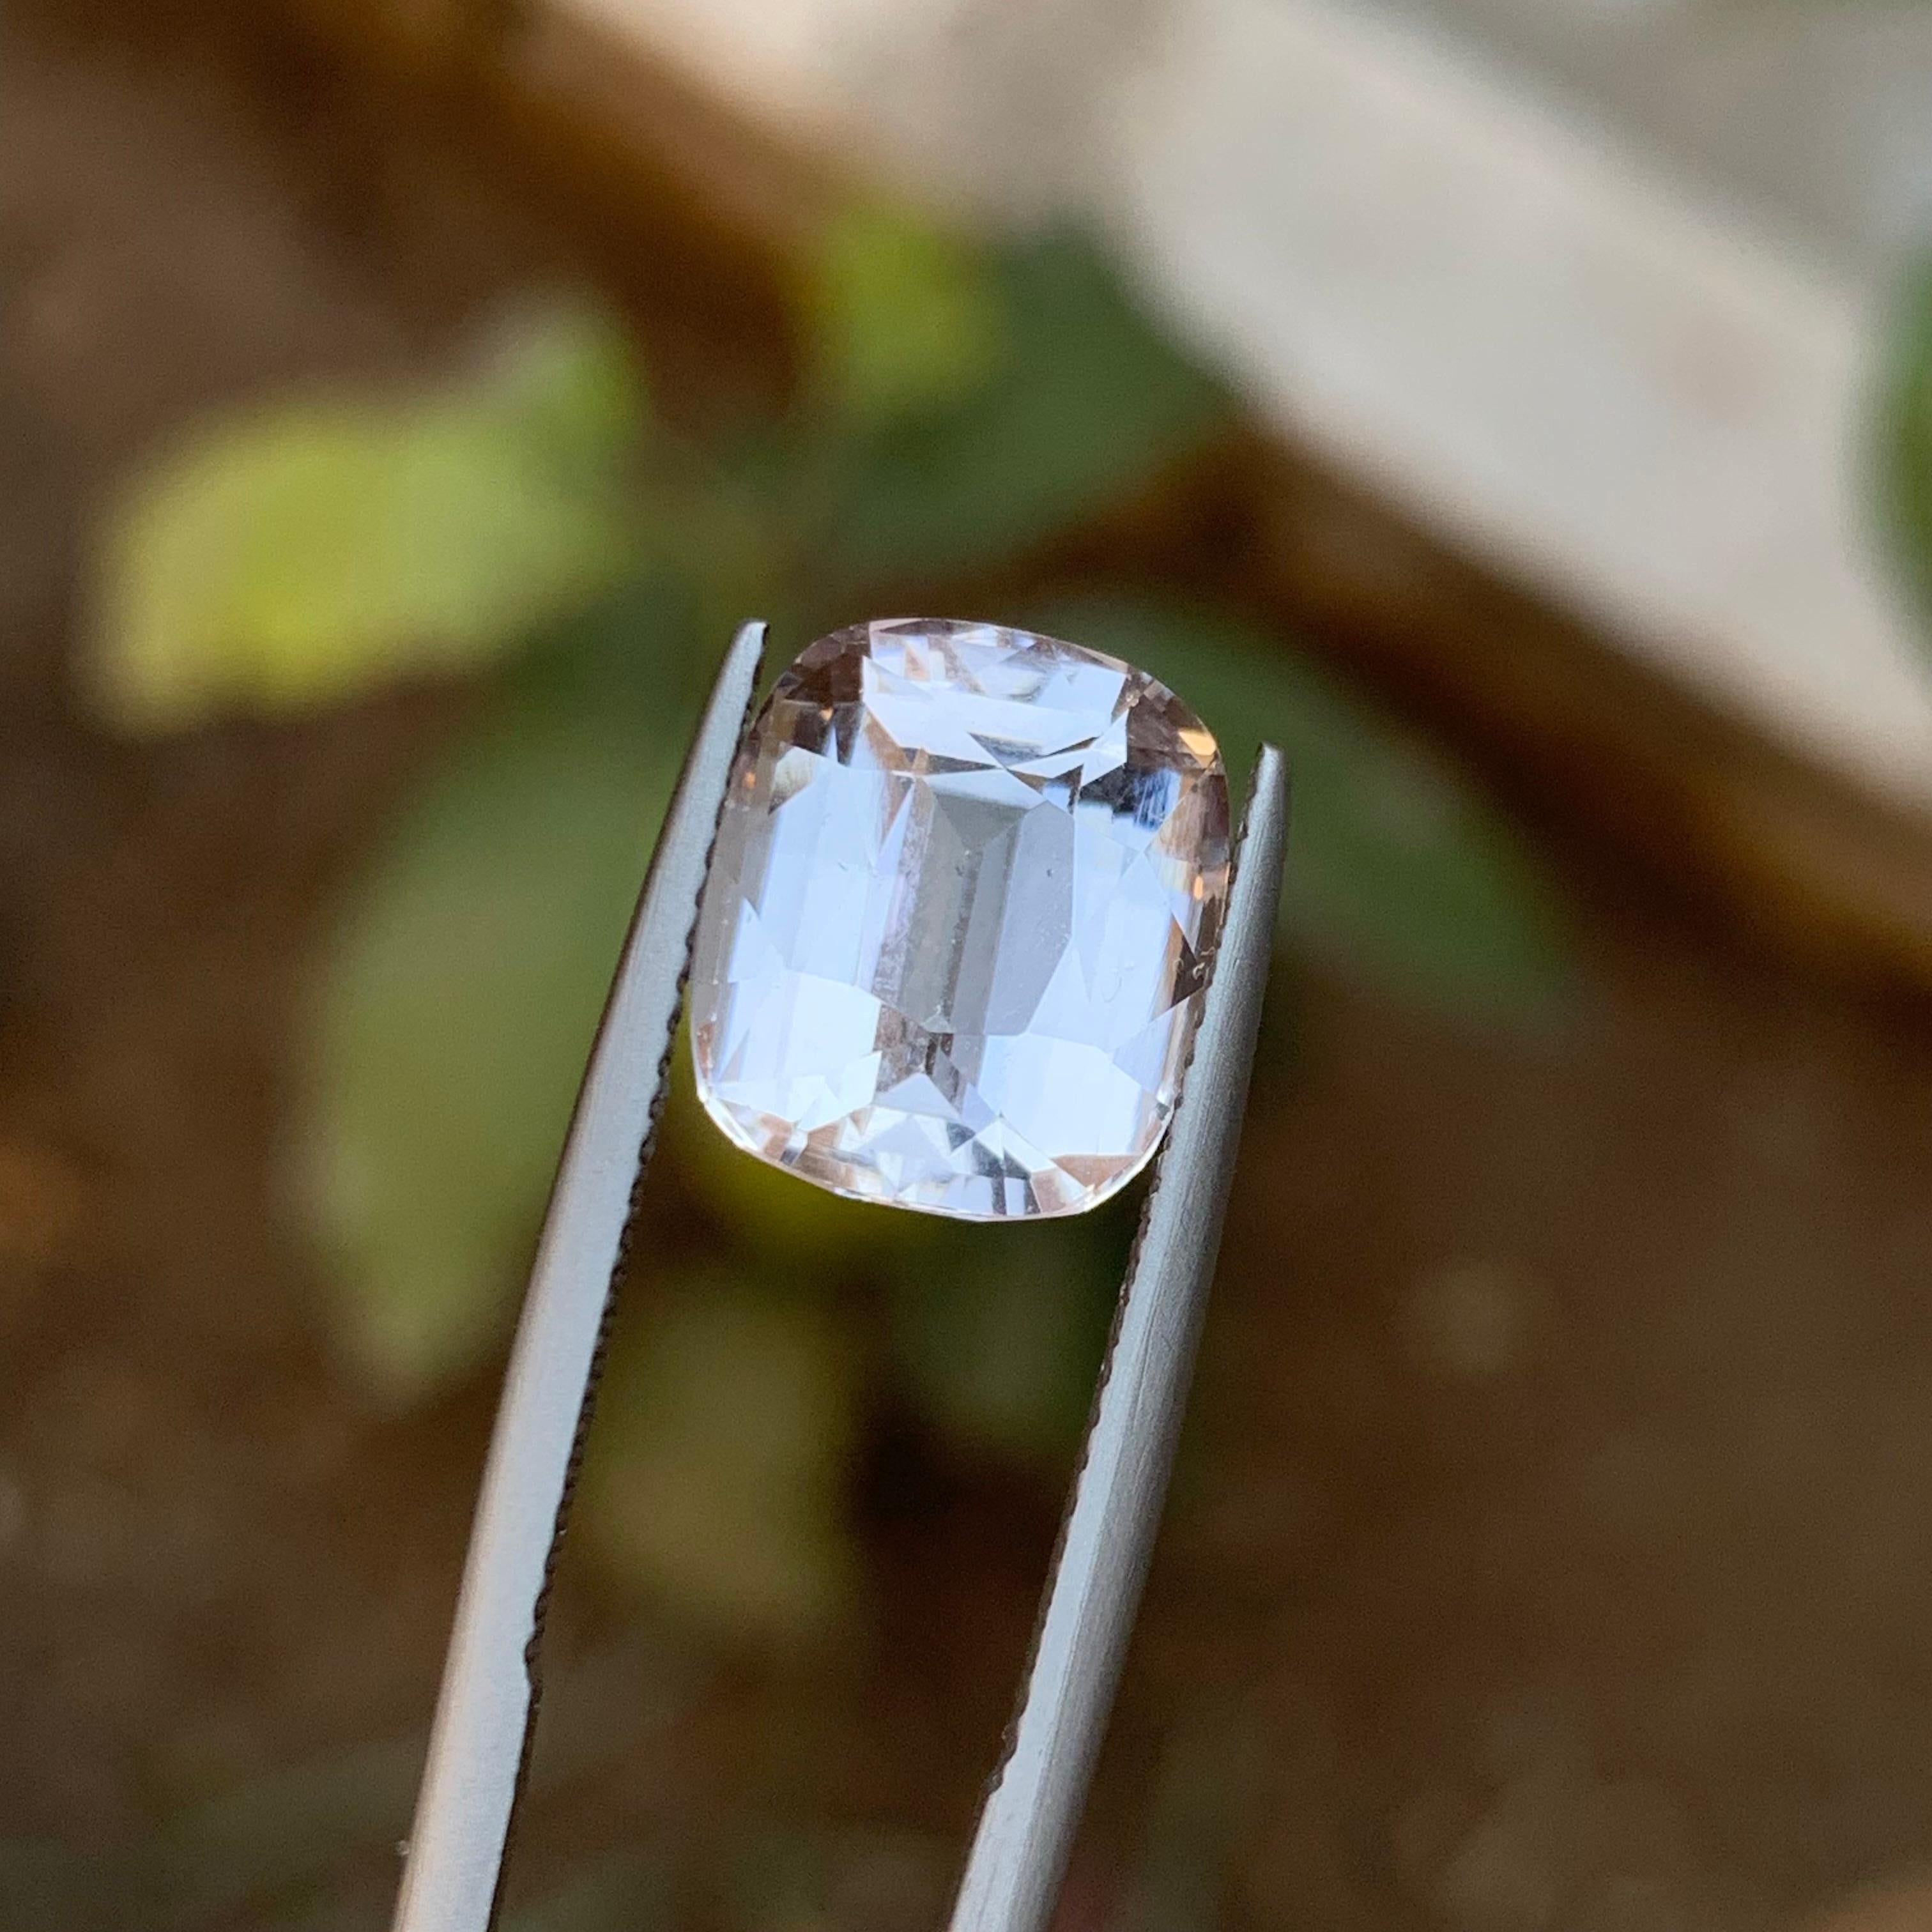 Rare White Natural Morganite Gemstone, 6.10 Ct Cushion Cut for Ring/Pendant Afg For Sale 3